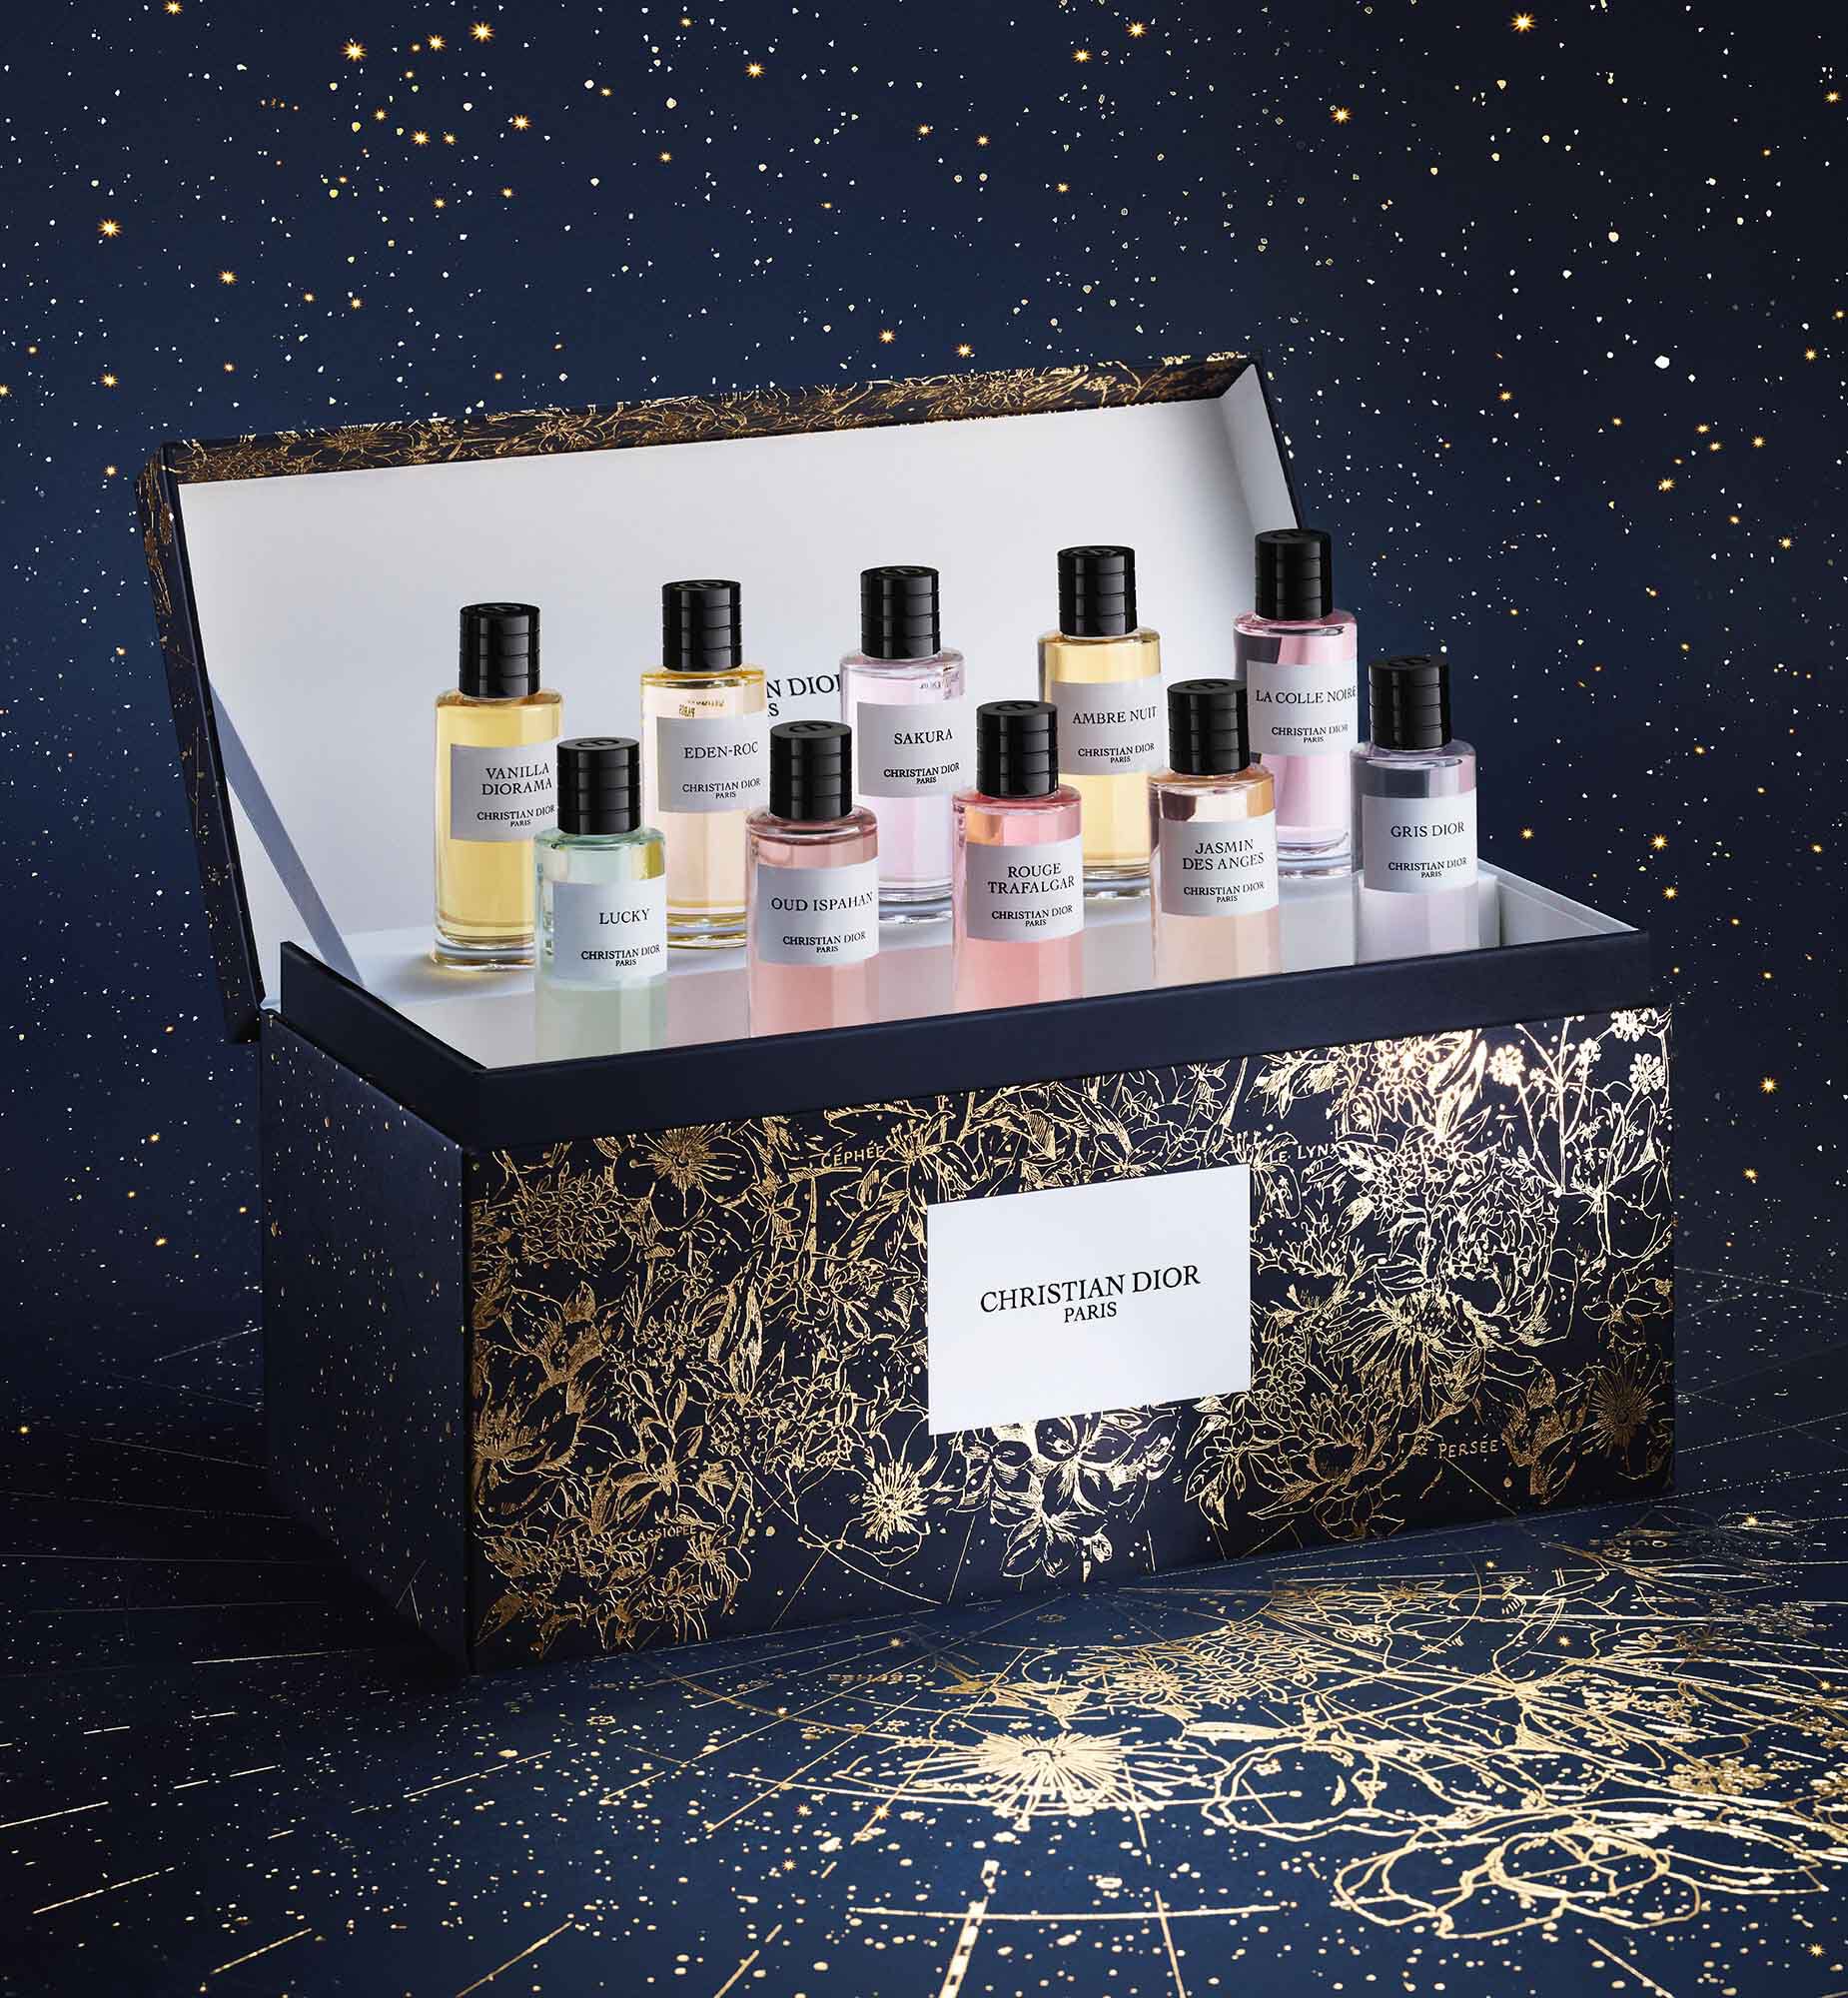 LA COLLECTION PRIVÉE CHRISTIAN DIOR  Fragrance Discovery Set  Dior Beauty  Online Boutique Malaysia